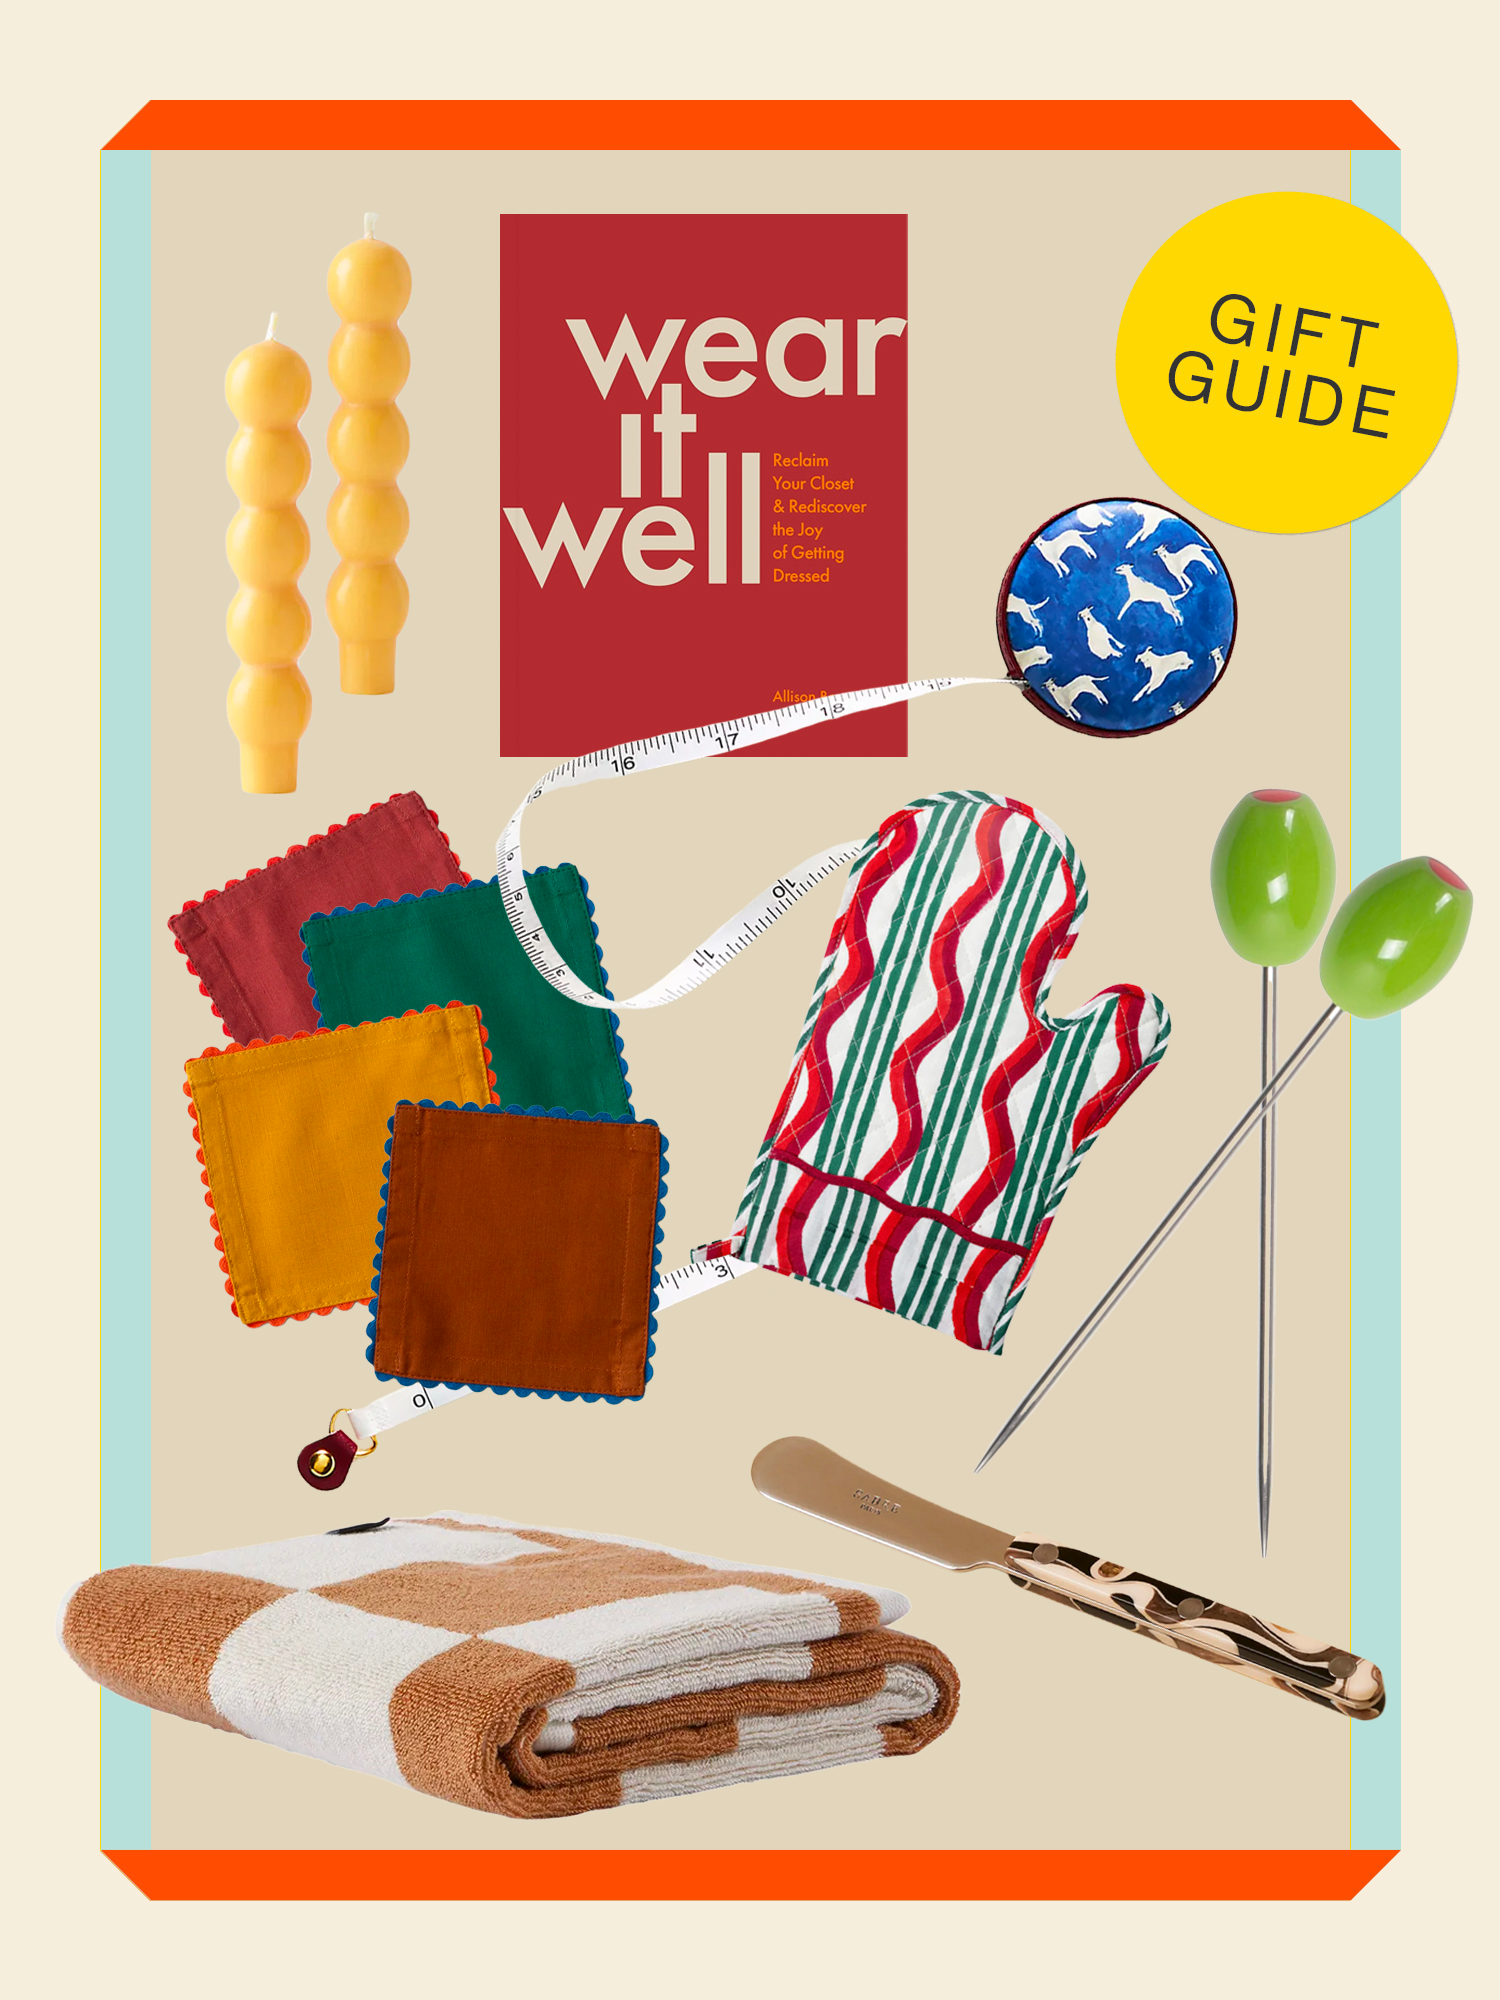 Prep In Your Step: Gift Guide: Under $25 Gifts for Men & Women